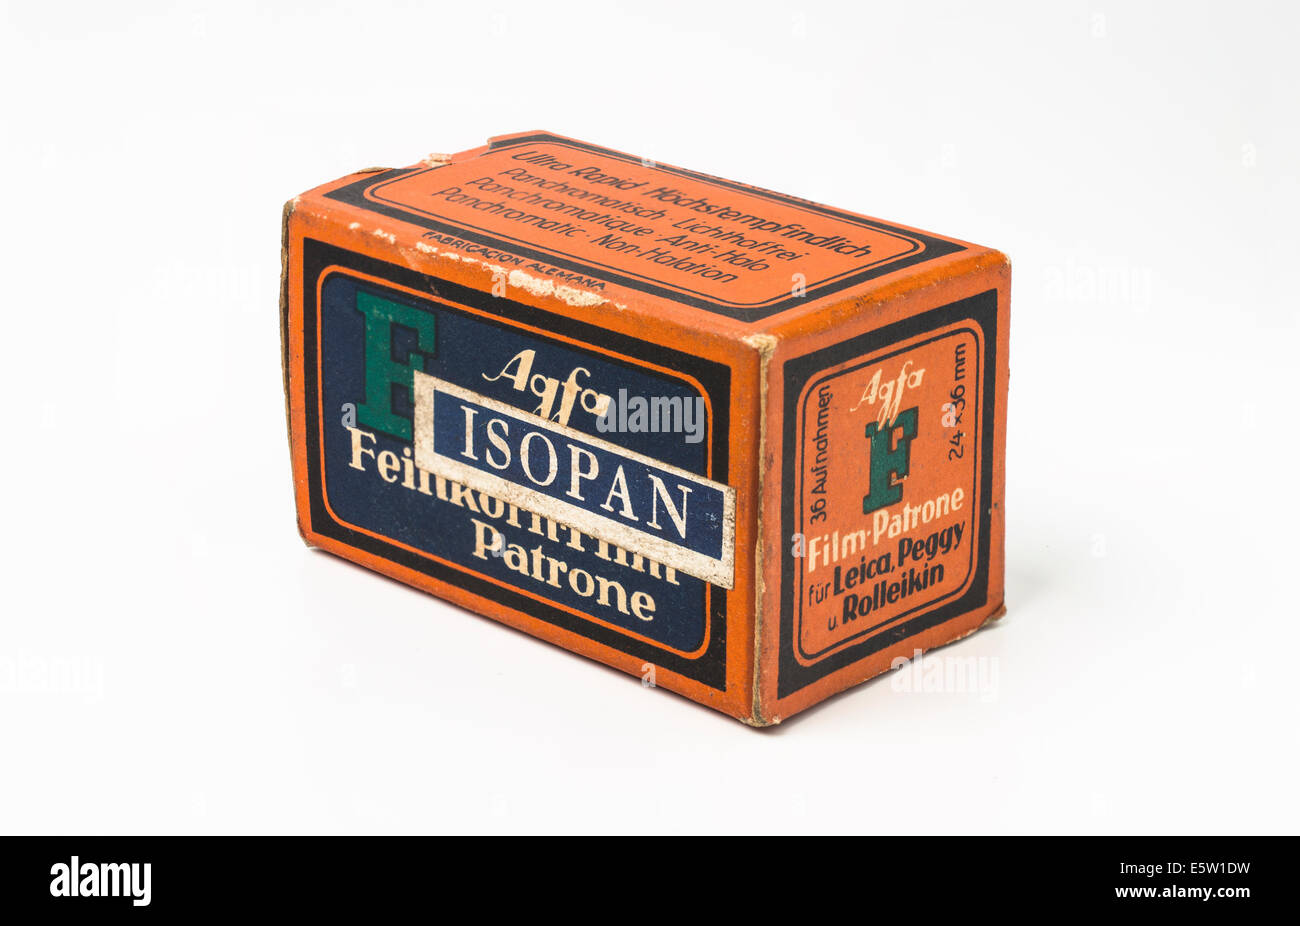 A roll of vintage Agfa Isopan F high speed 35mm camera film dated 1936 Stock Photo